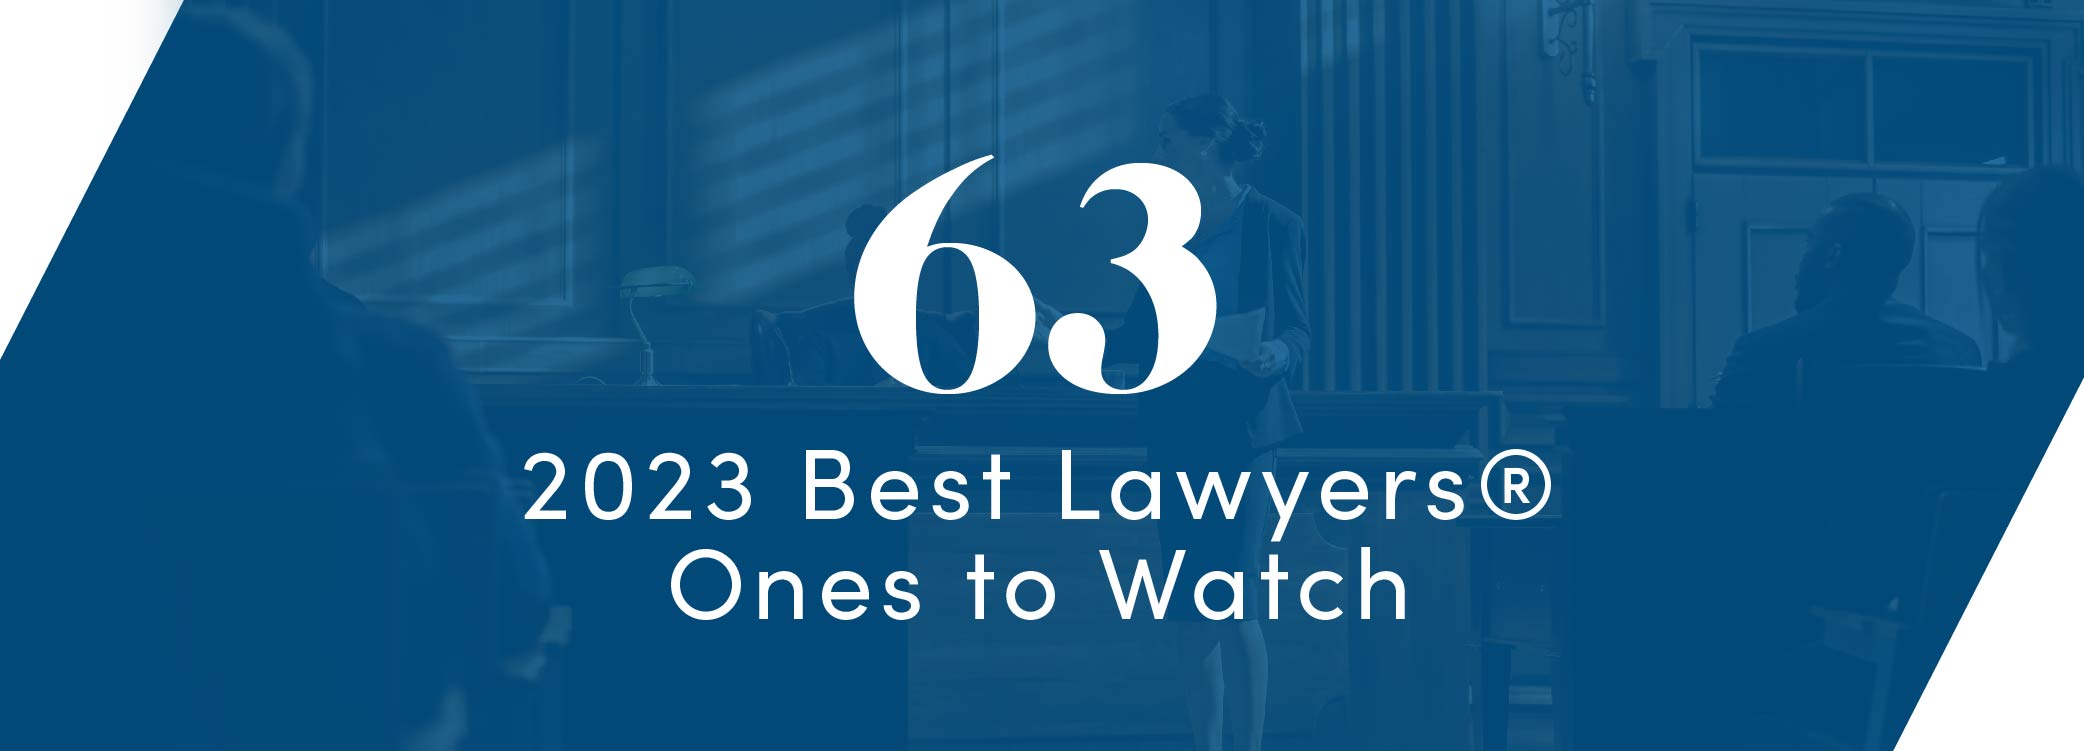 Best Lawyers® 2023 Names 63 Dinsmore Attorneys “Ones to Watch”